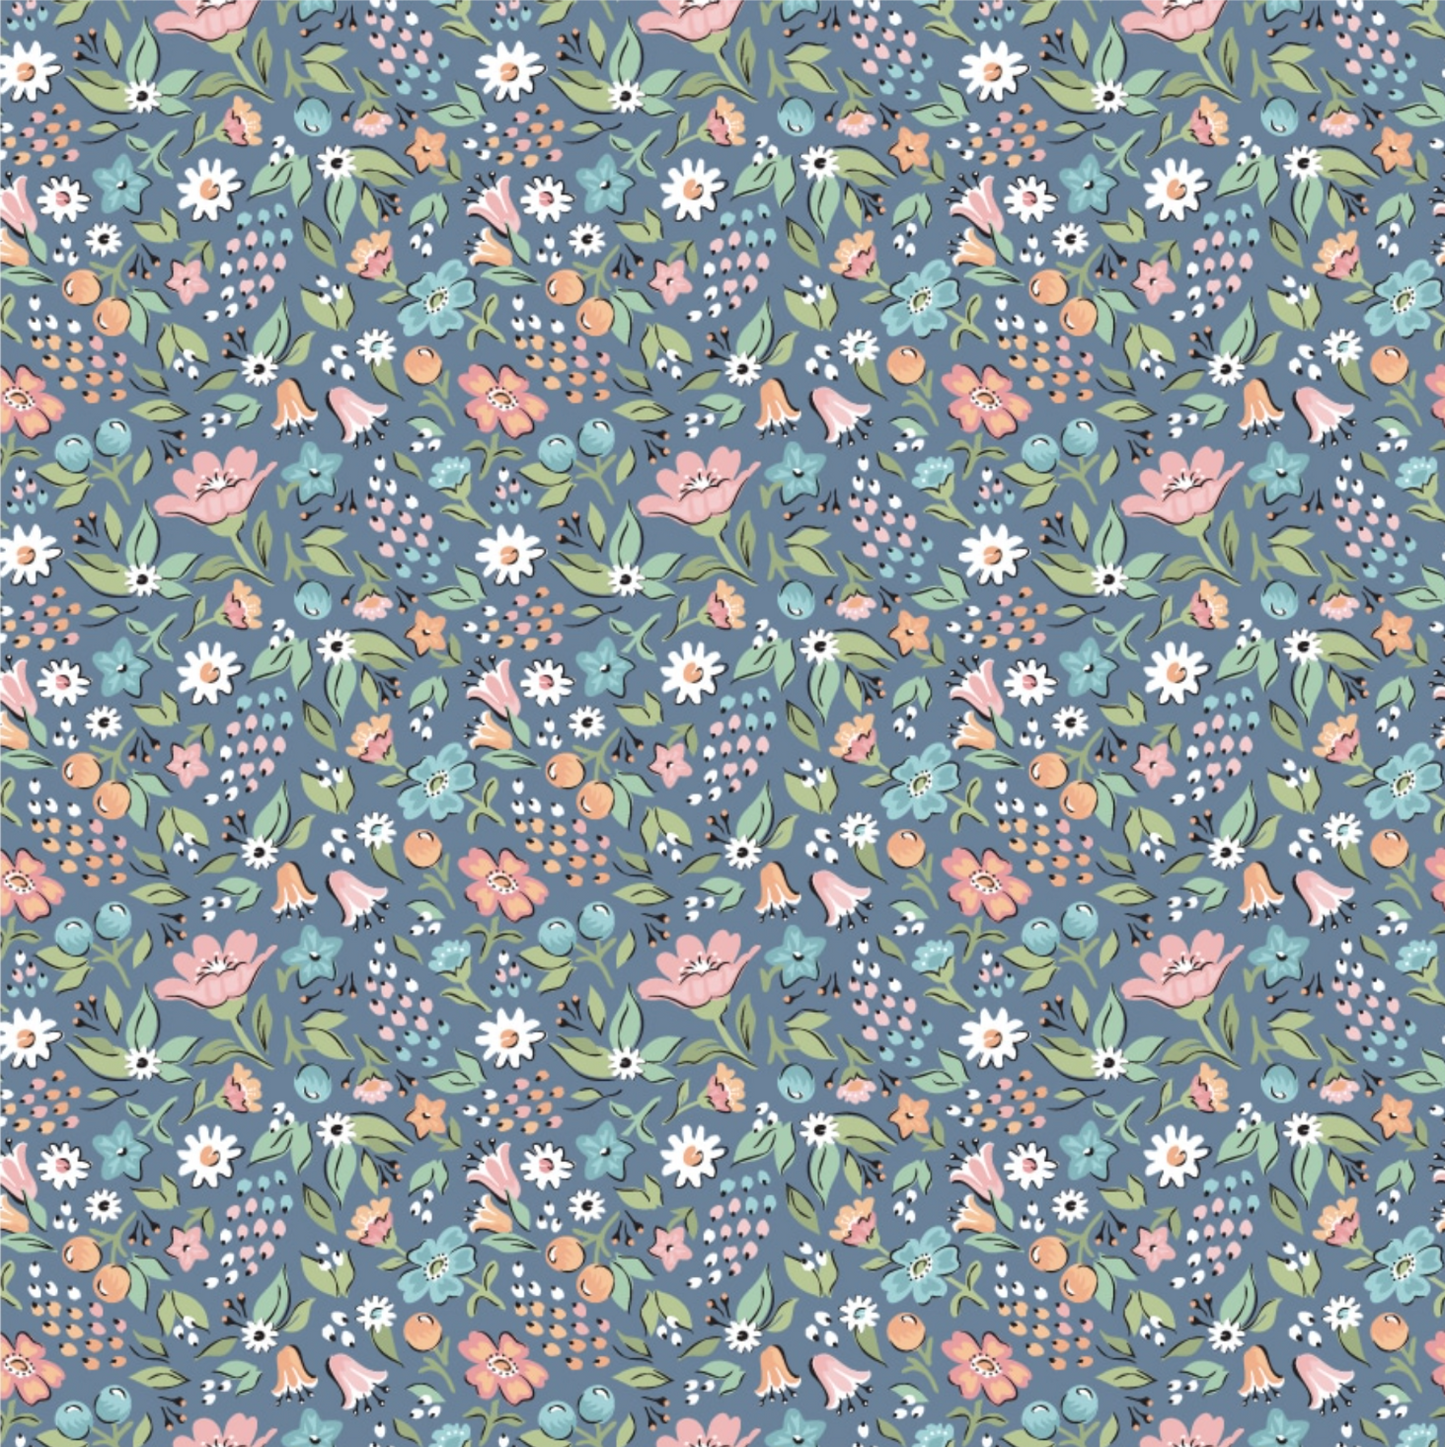 Garden Party, Freshly Picked Night, GP23320 sold by the 1/2 yard